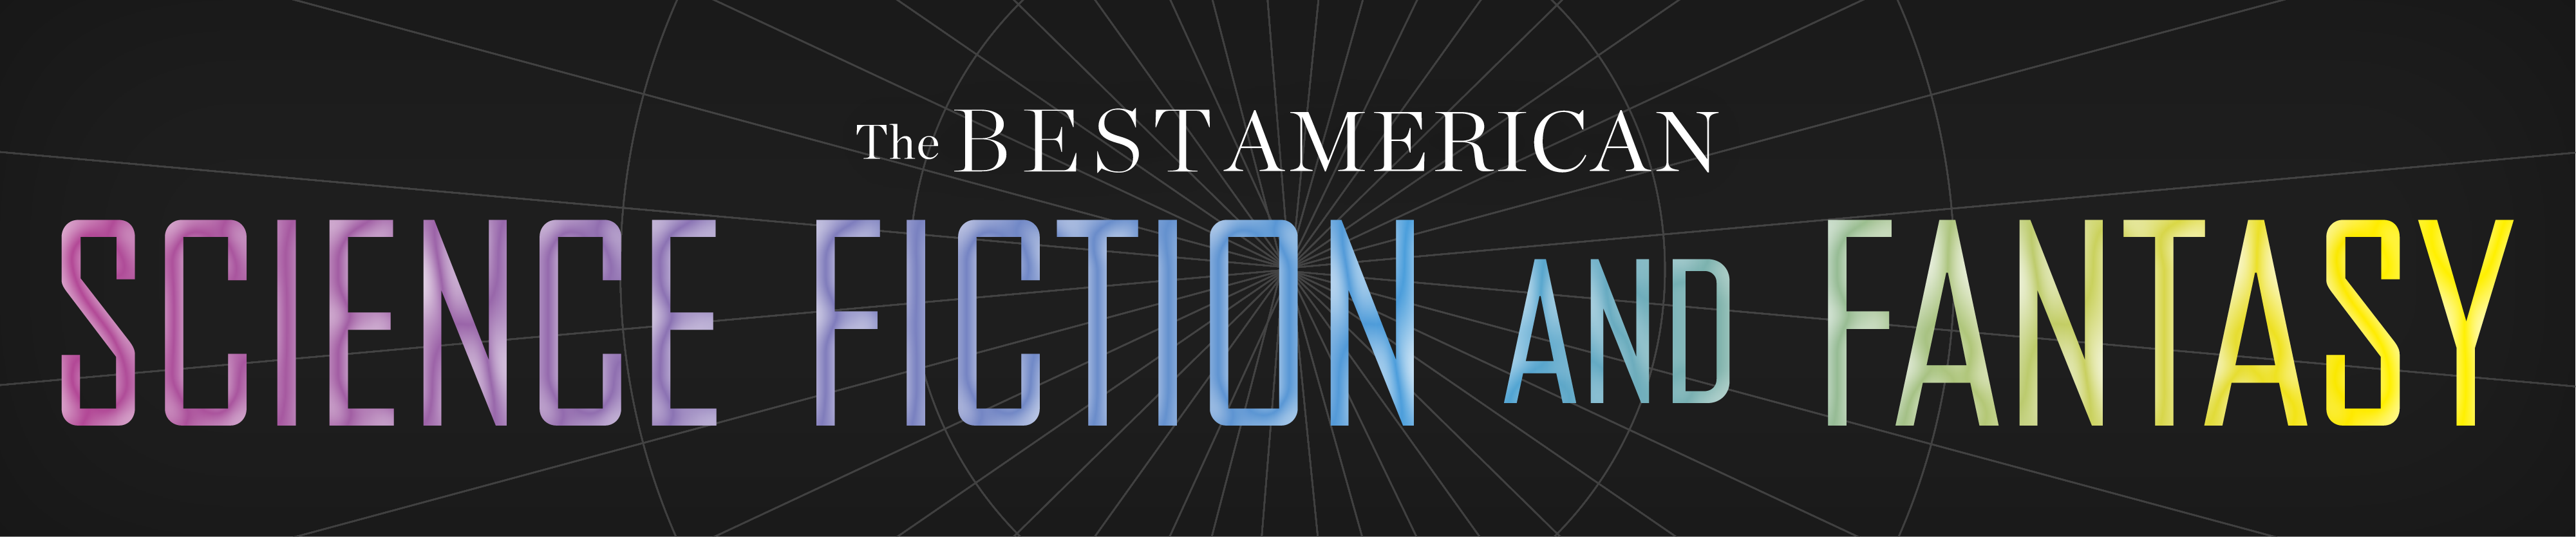 best american science fiction and fantasy